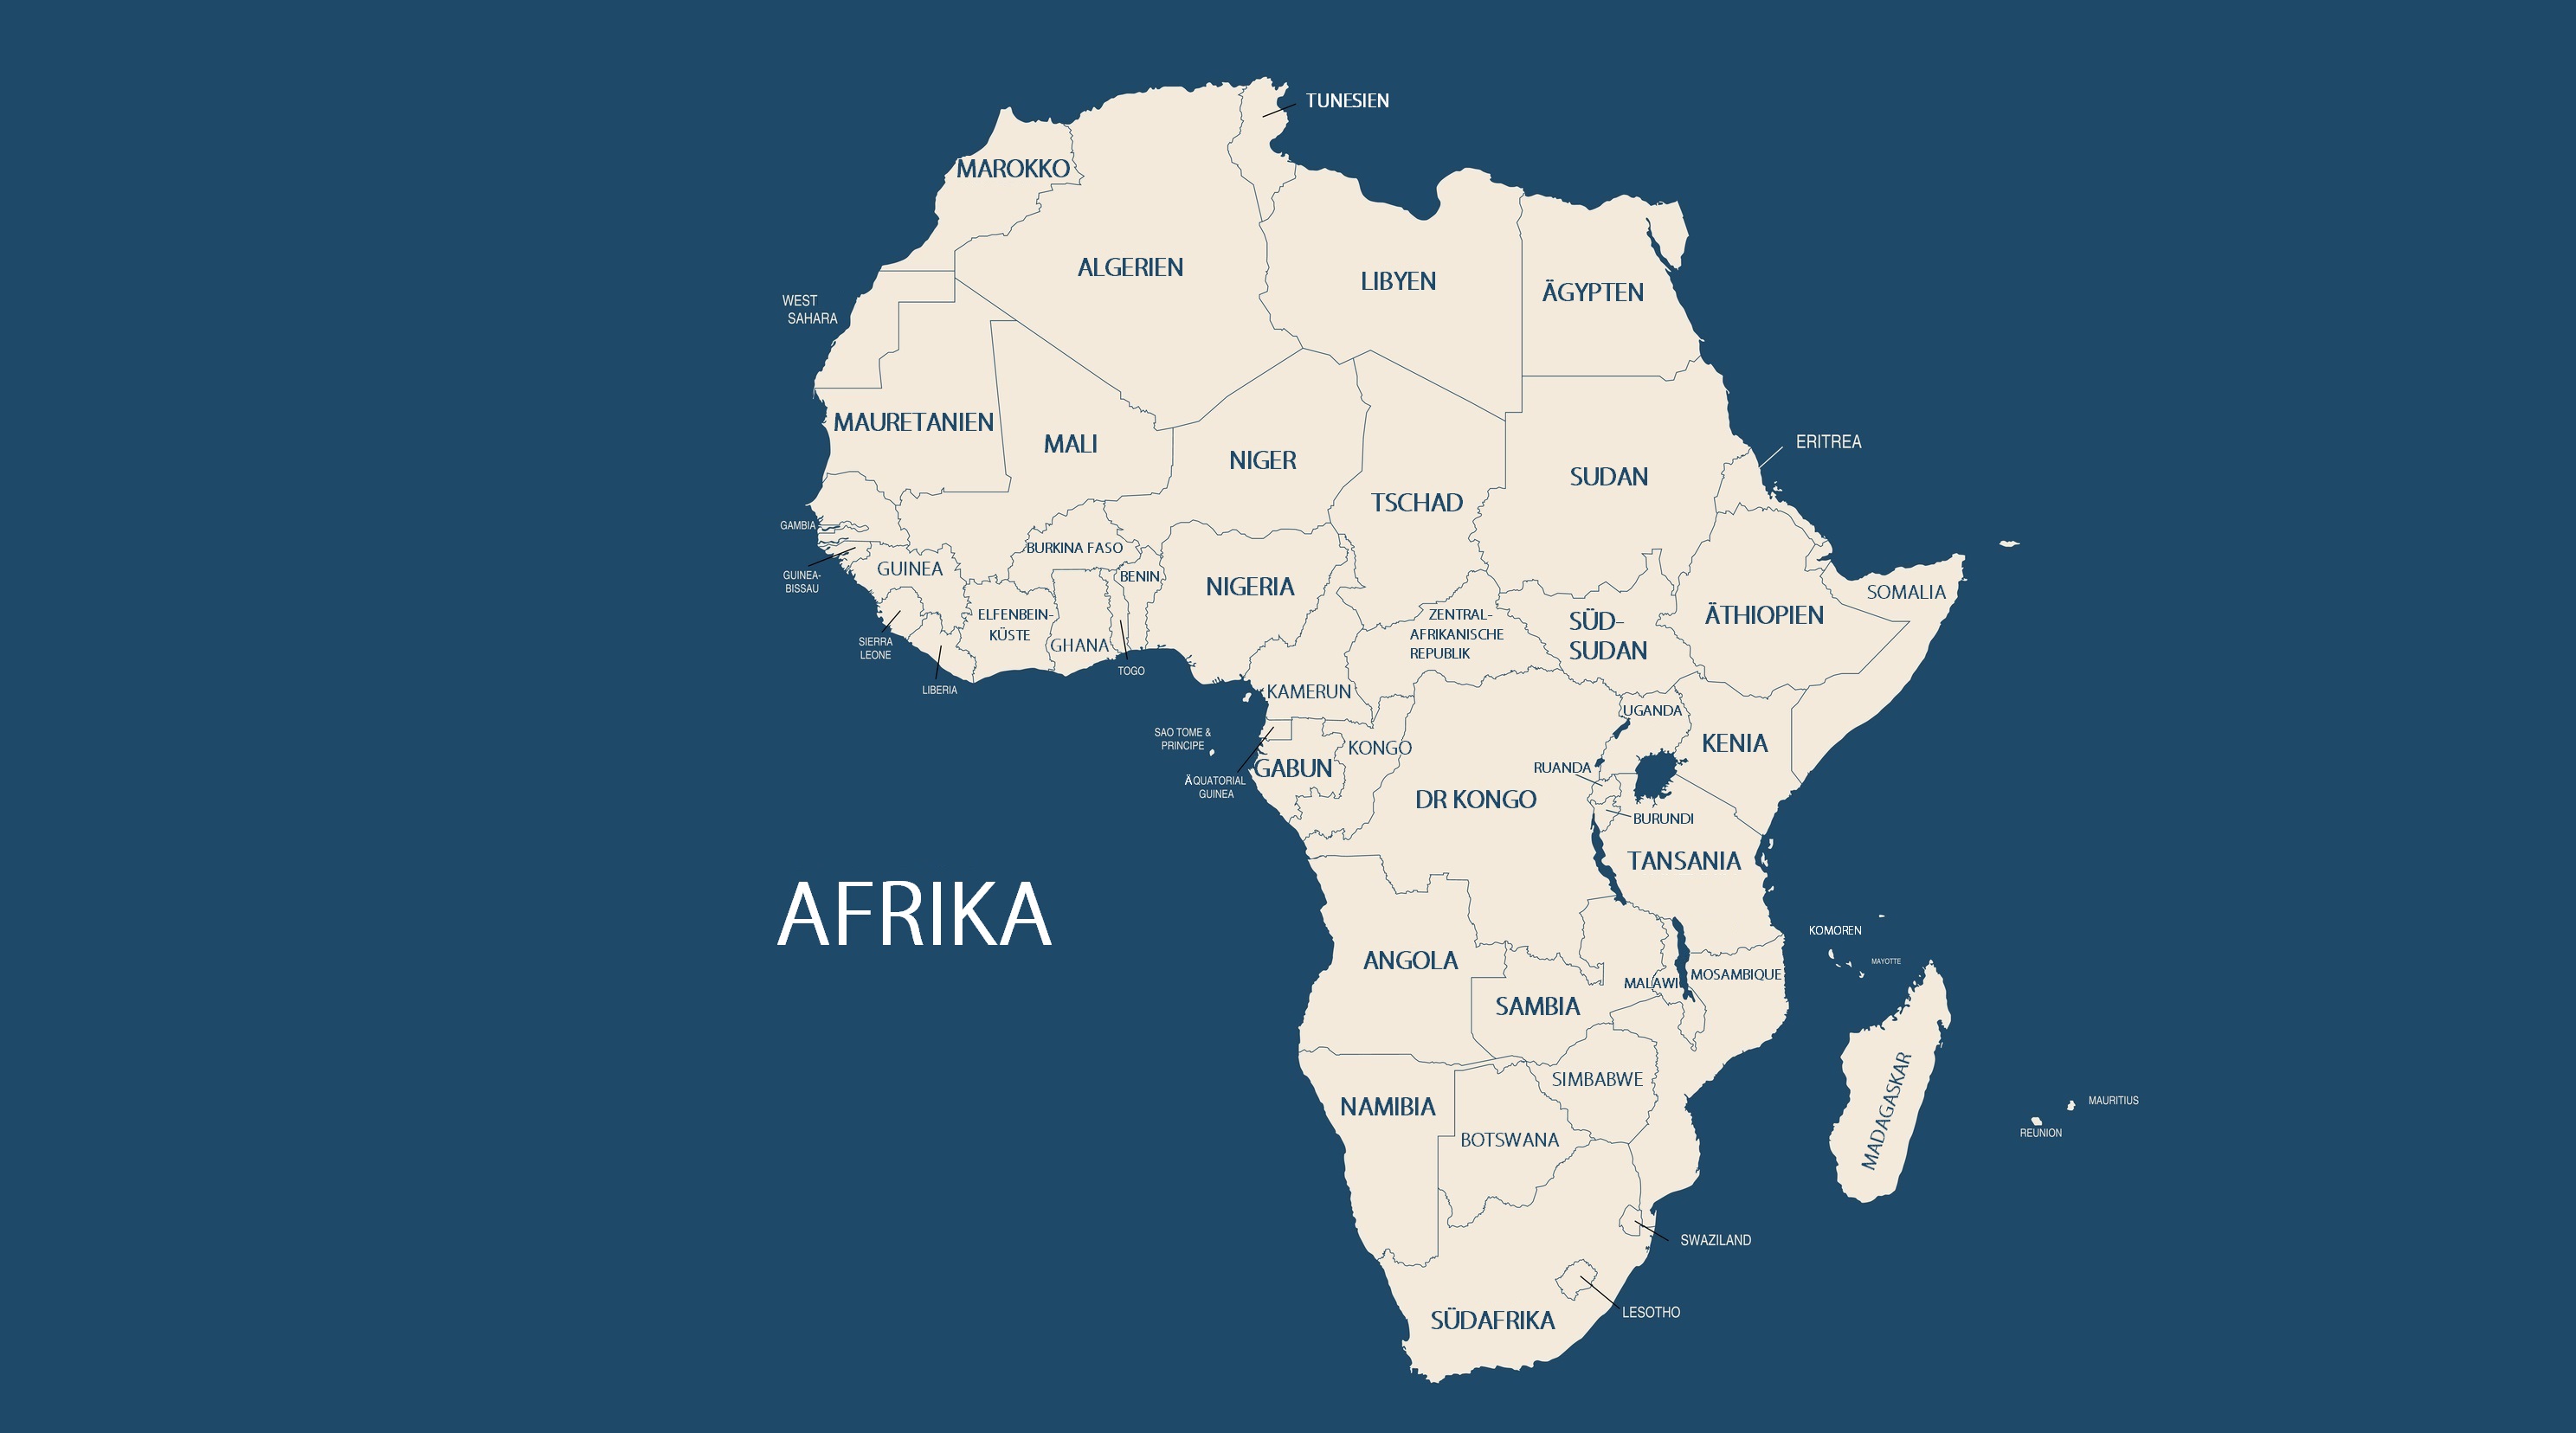 Africa Map Colored Countries Shapes – Bayernkurier